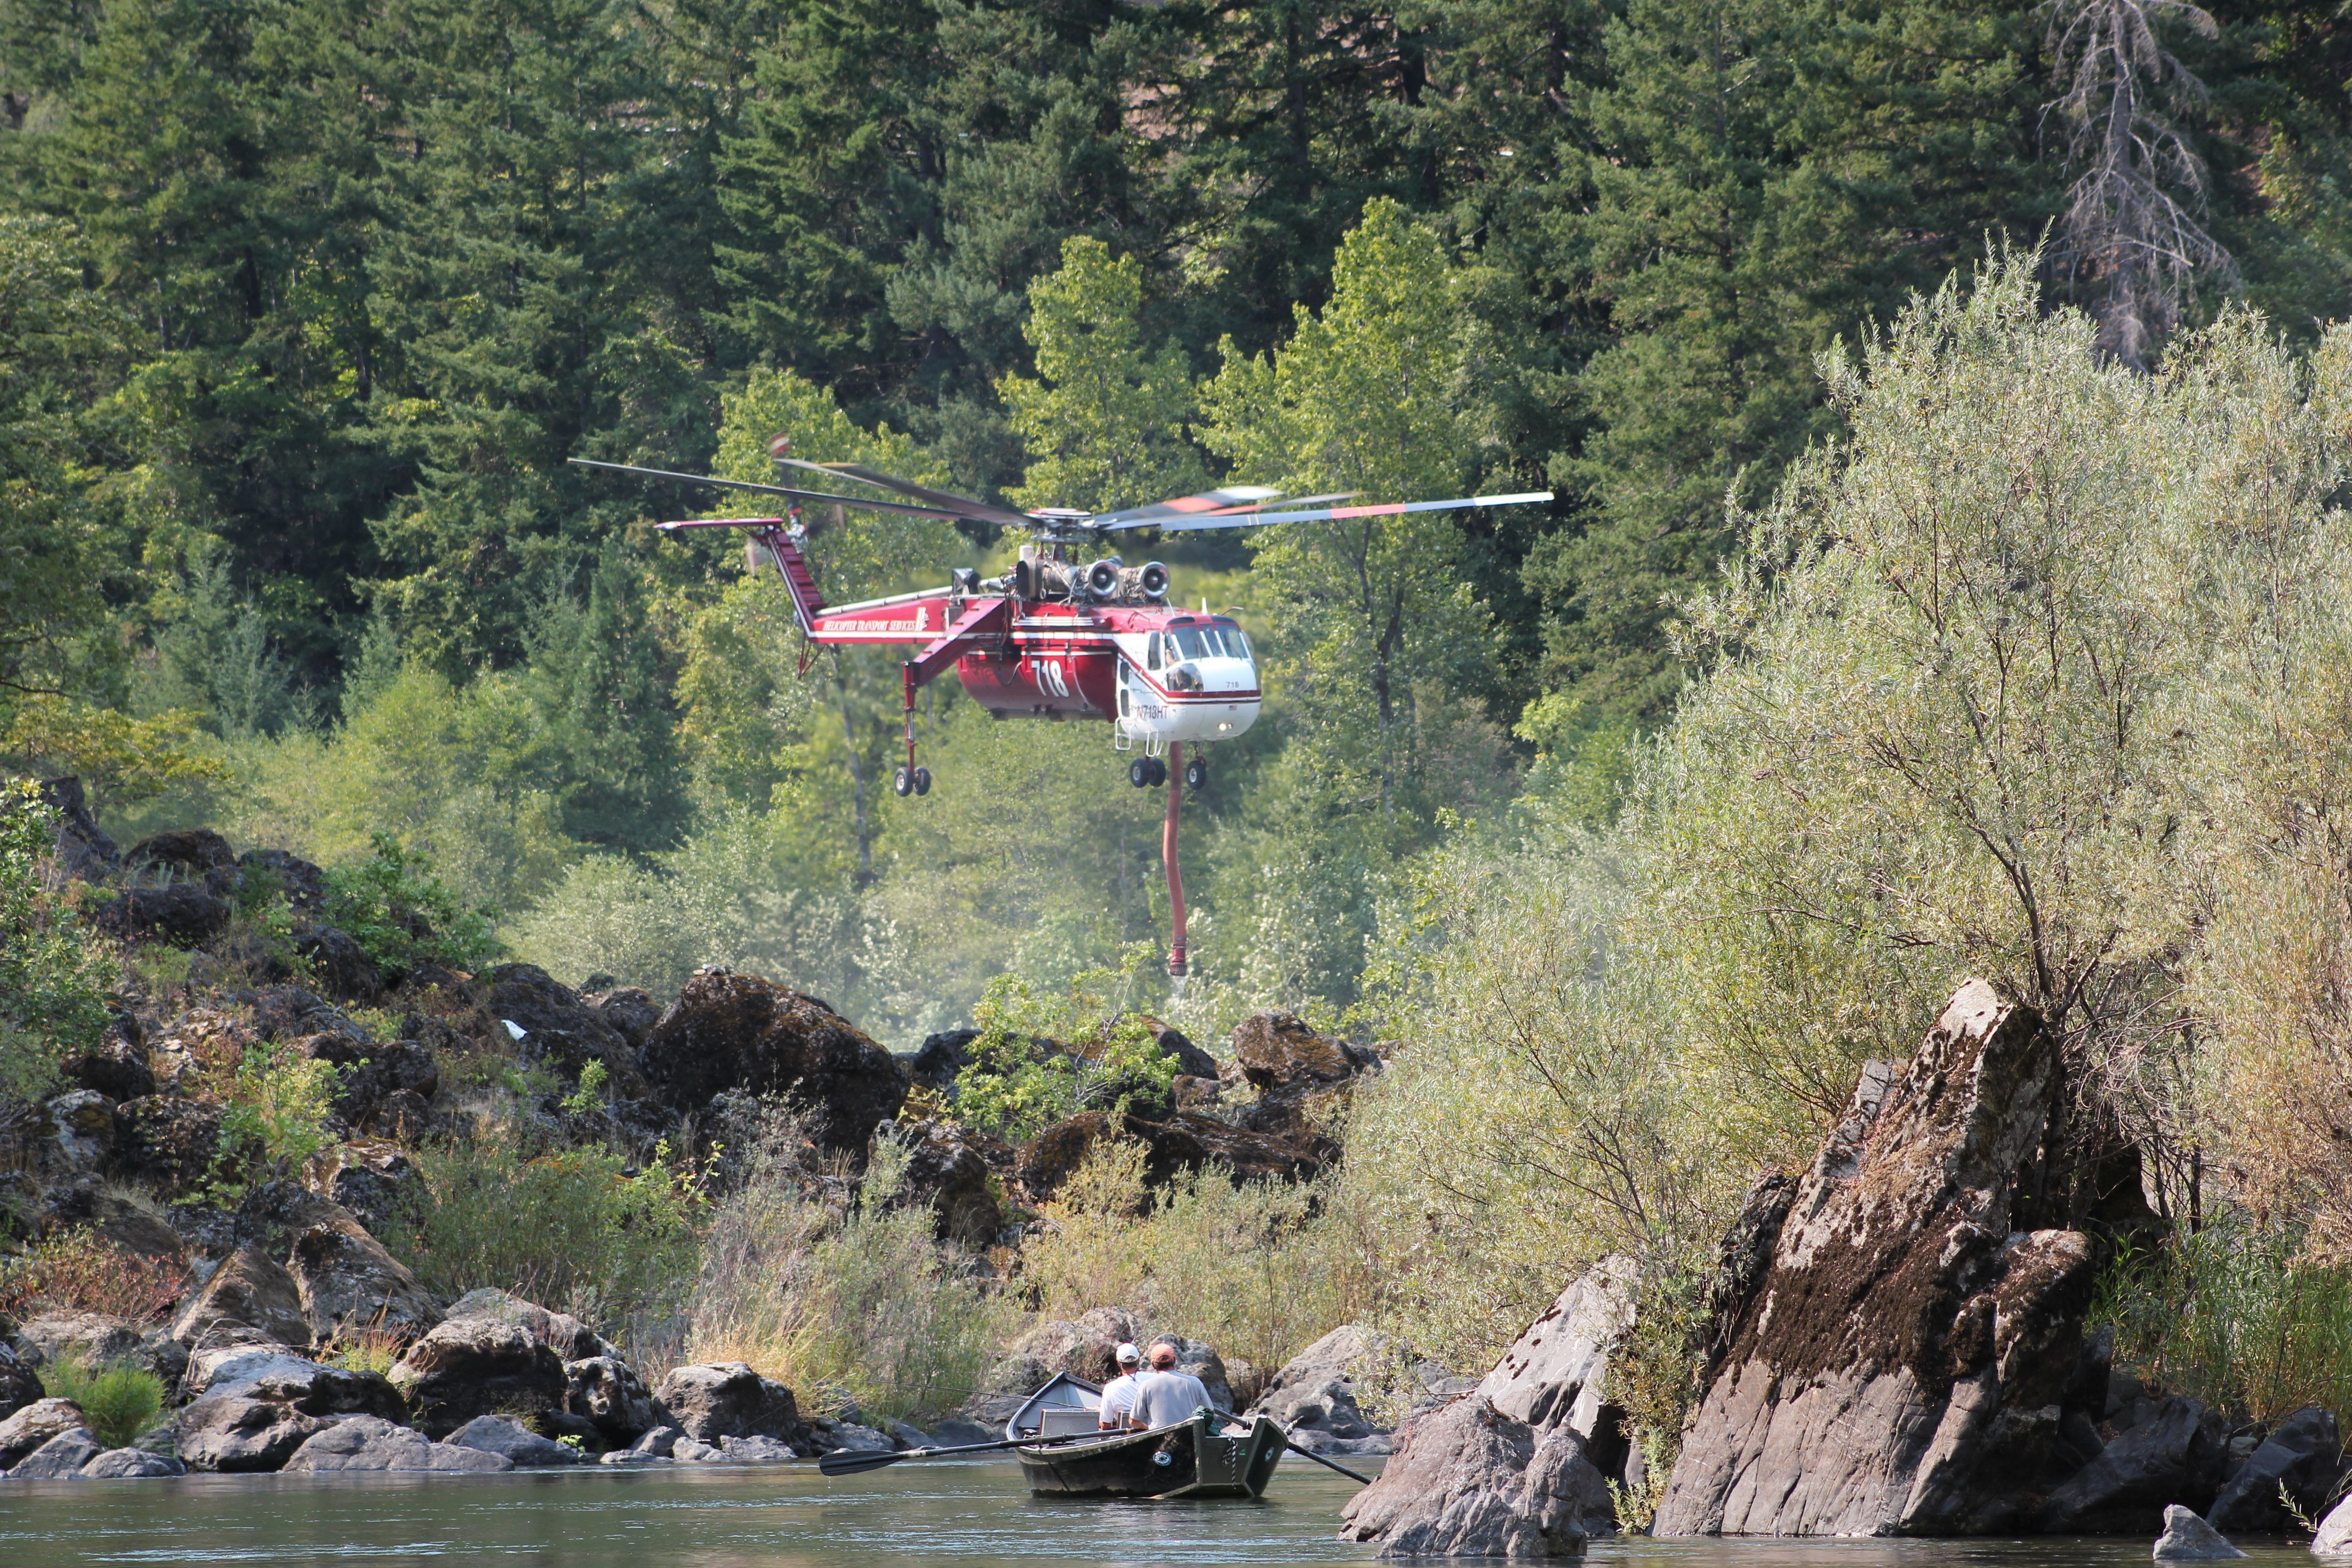 Sikorsky CH-54 Tarhe (N718HT) - Fire Fighting Aircrane Helitanker departing after taking on water in the Rogue River on September 10th 2013. Salmon Float Fishermen in the foreground. This tanker made over 20 runs that day